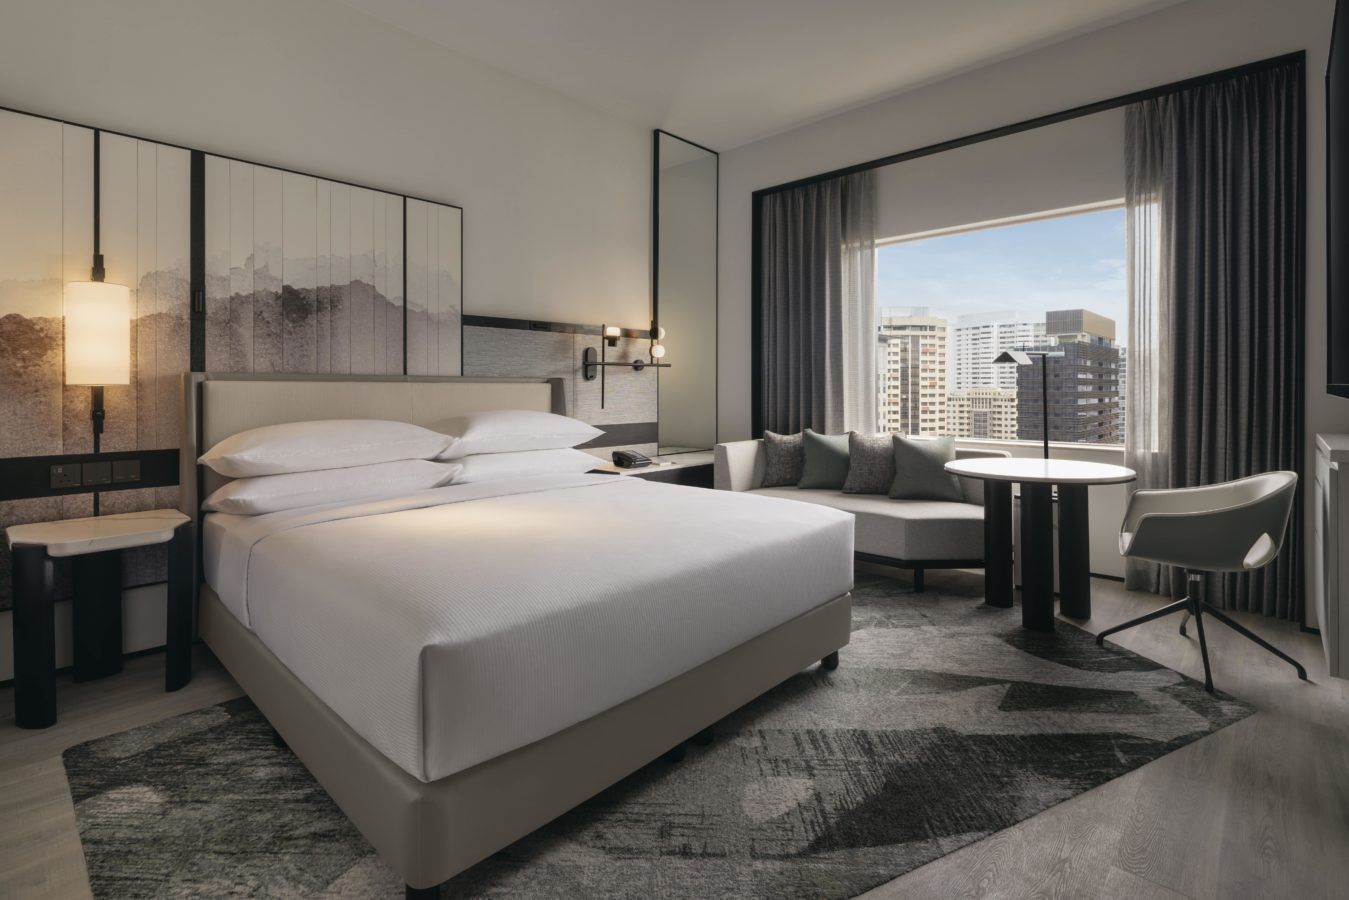 Review: Spend the weekend in town at the new Hilton Singapore Orchard